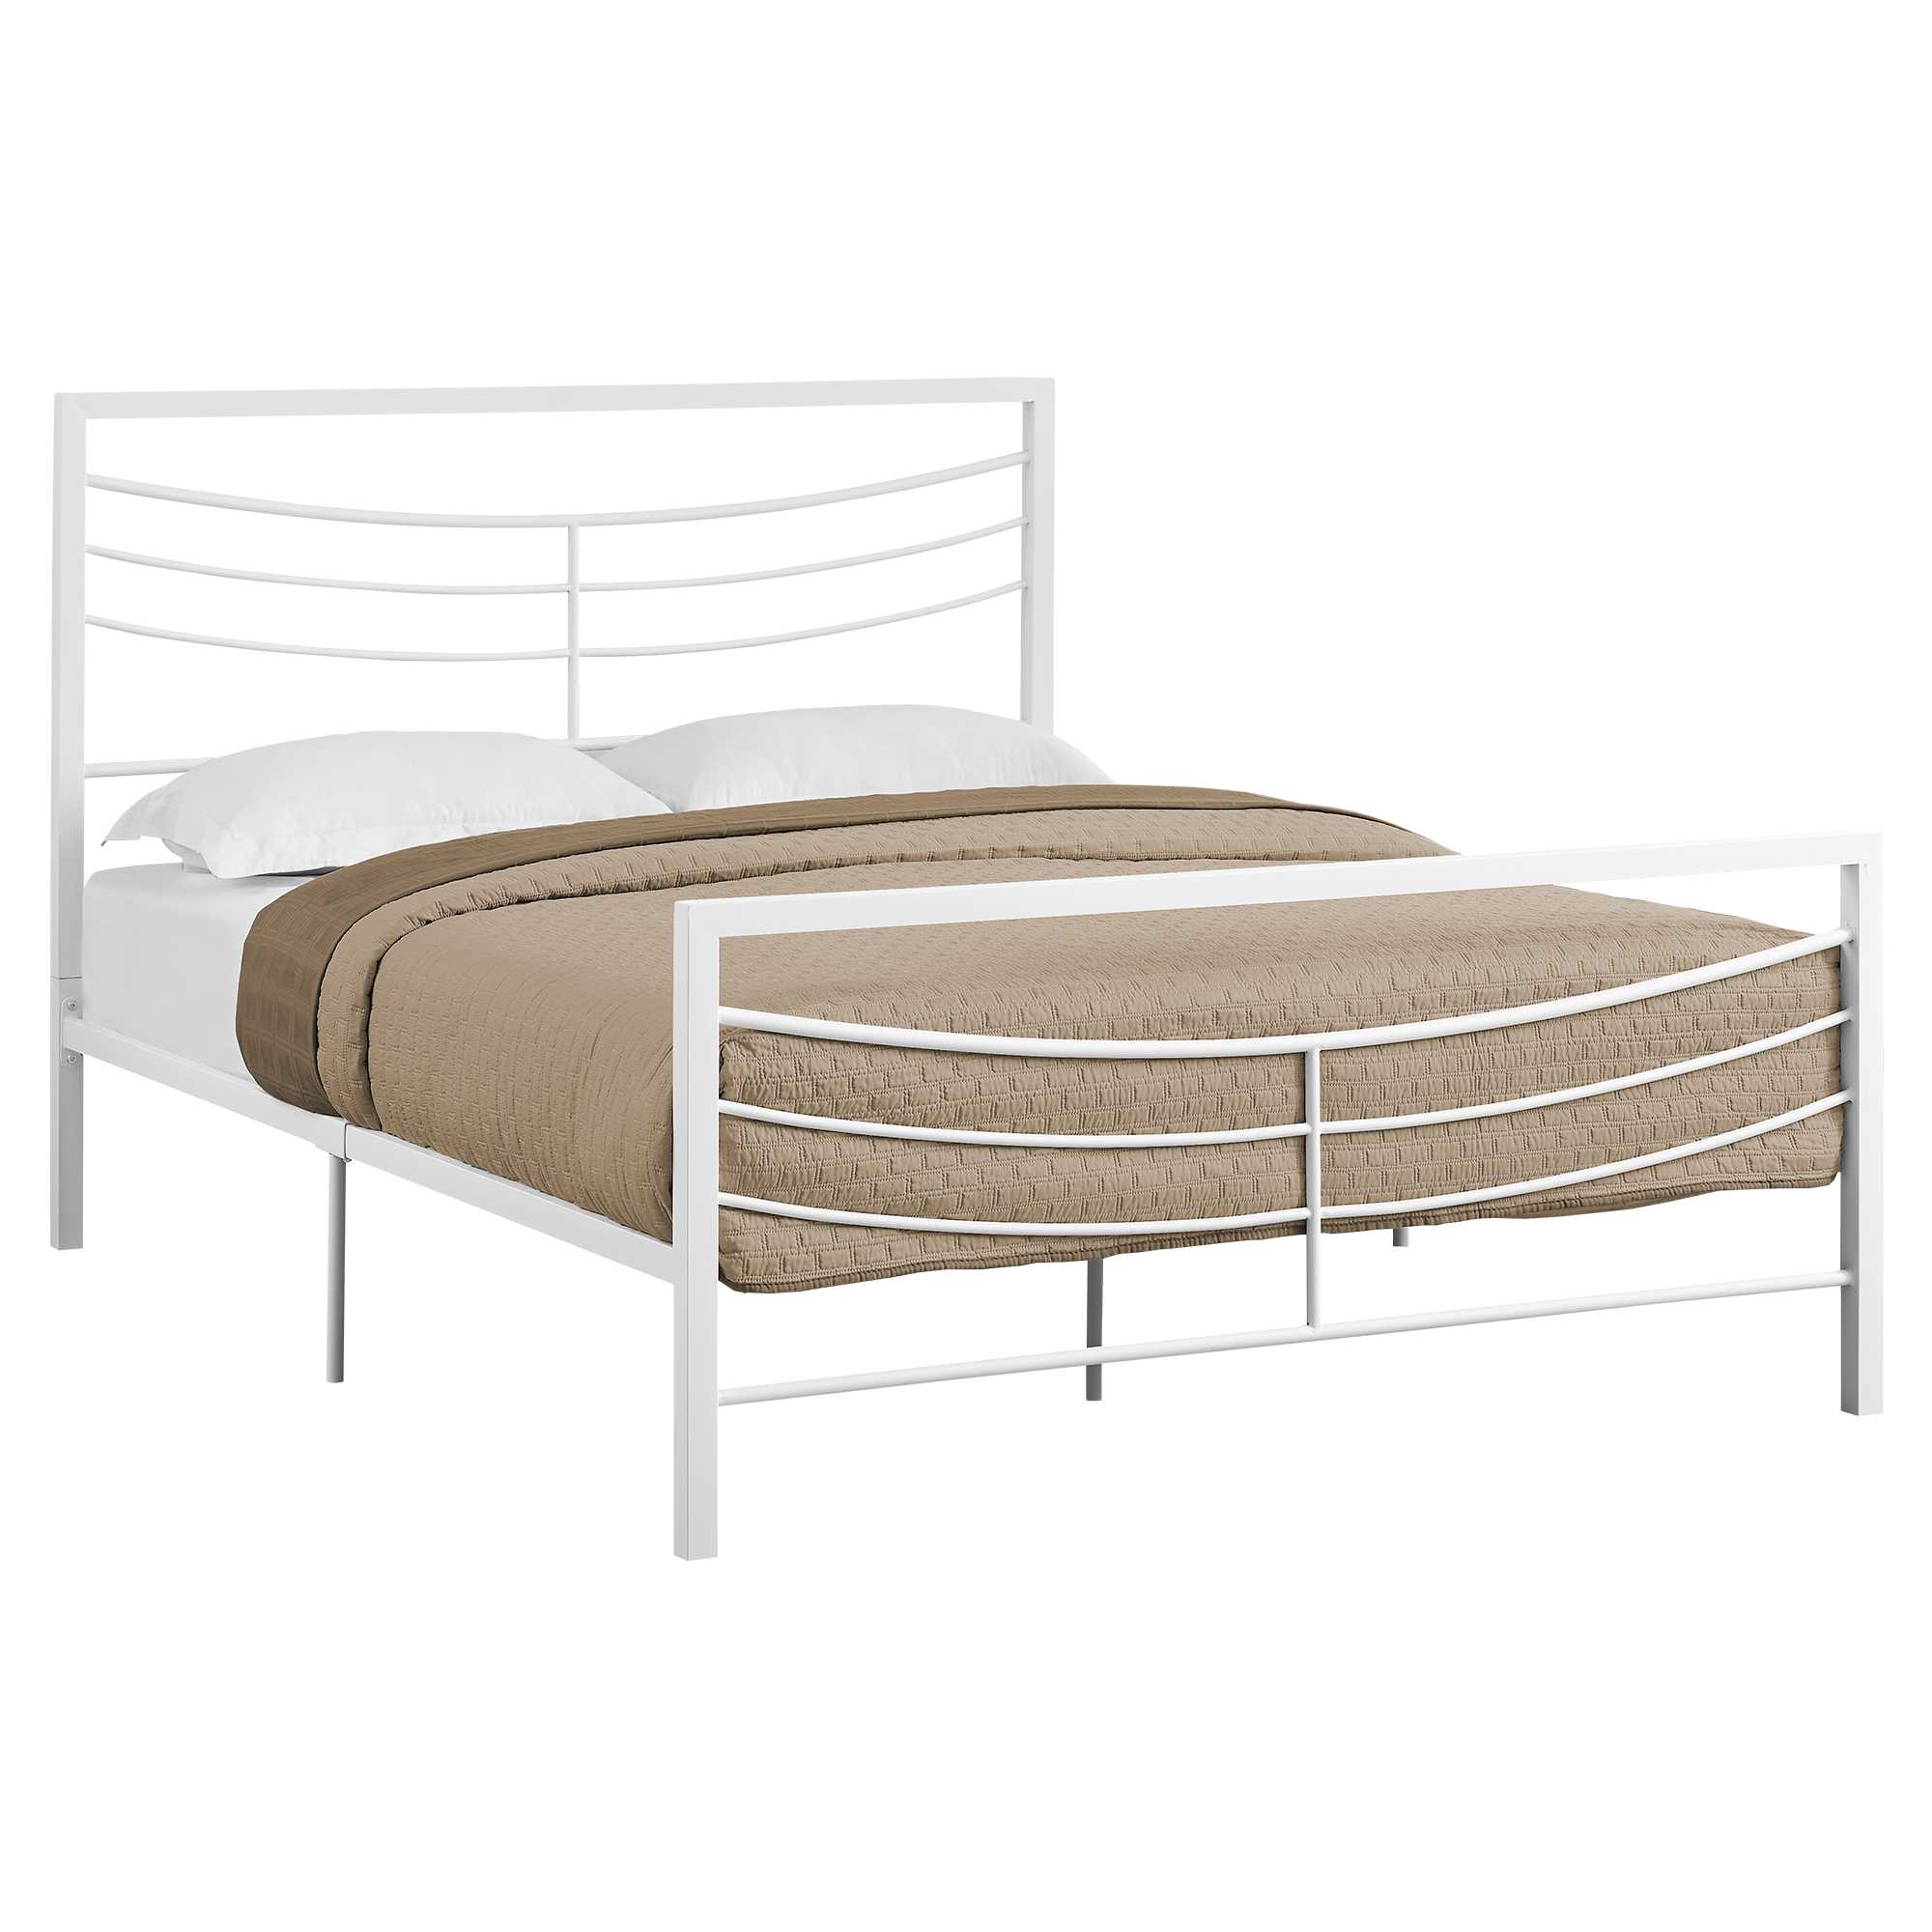 83.25" x 62.75" x 47.75" White Metal Queen Size Bed